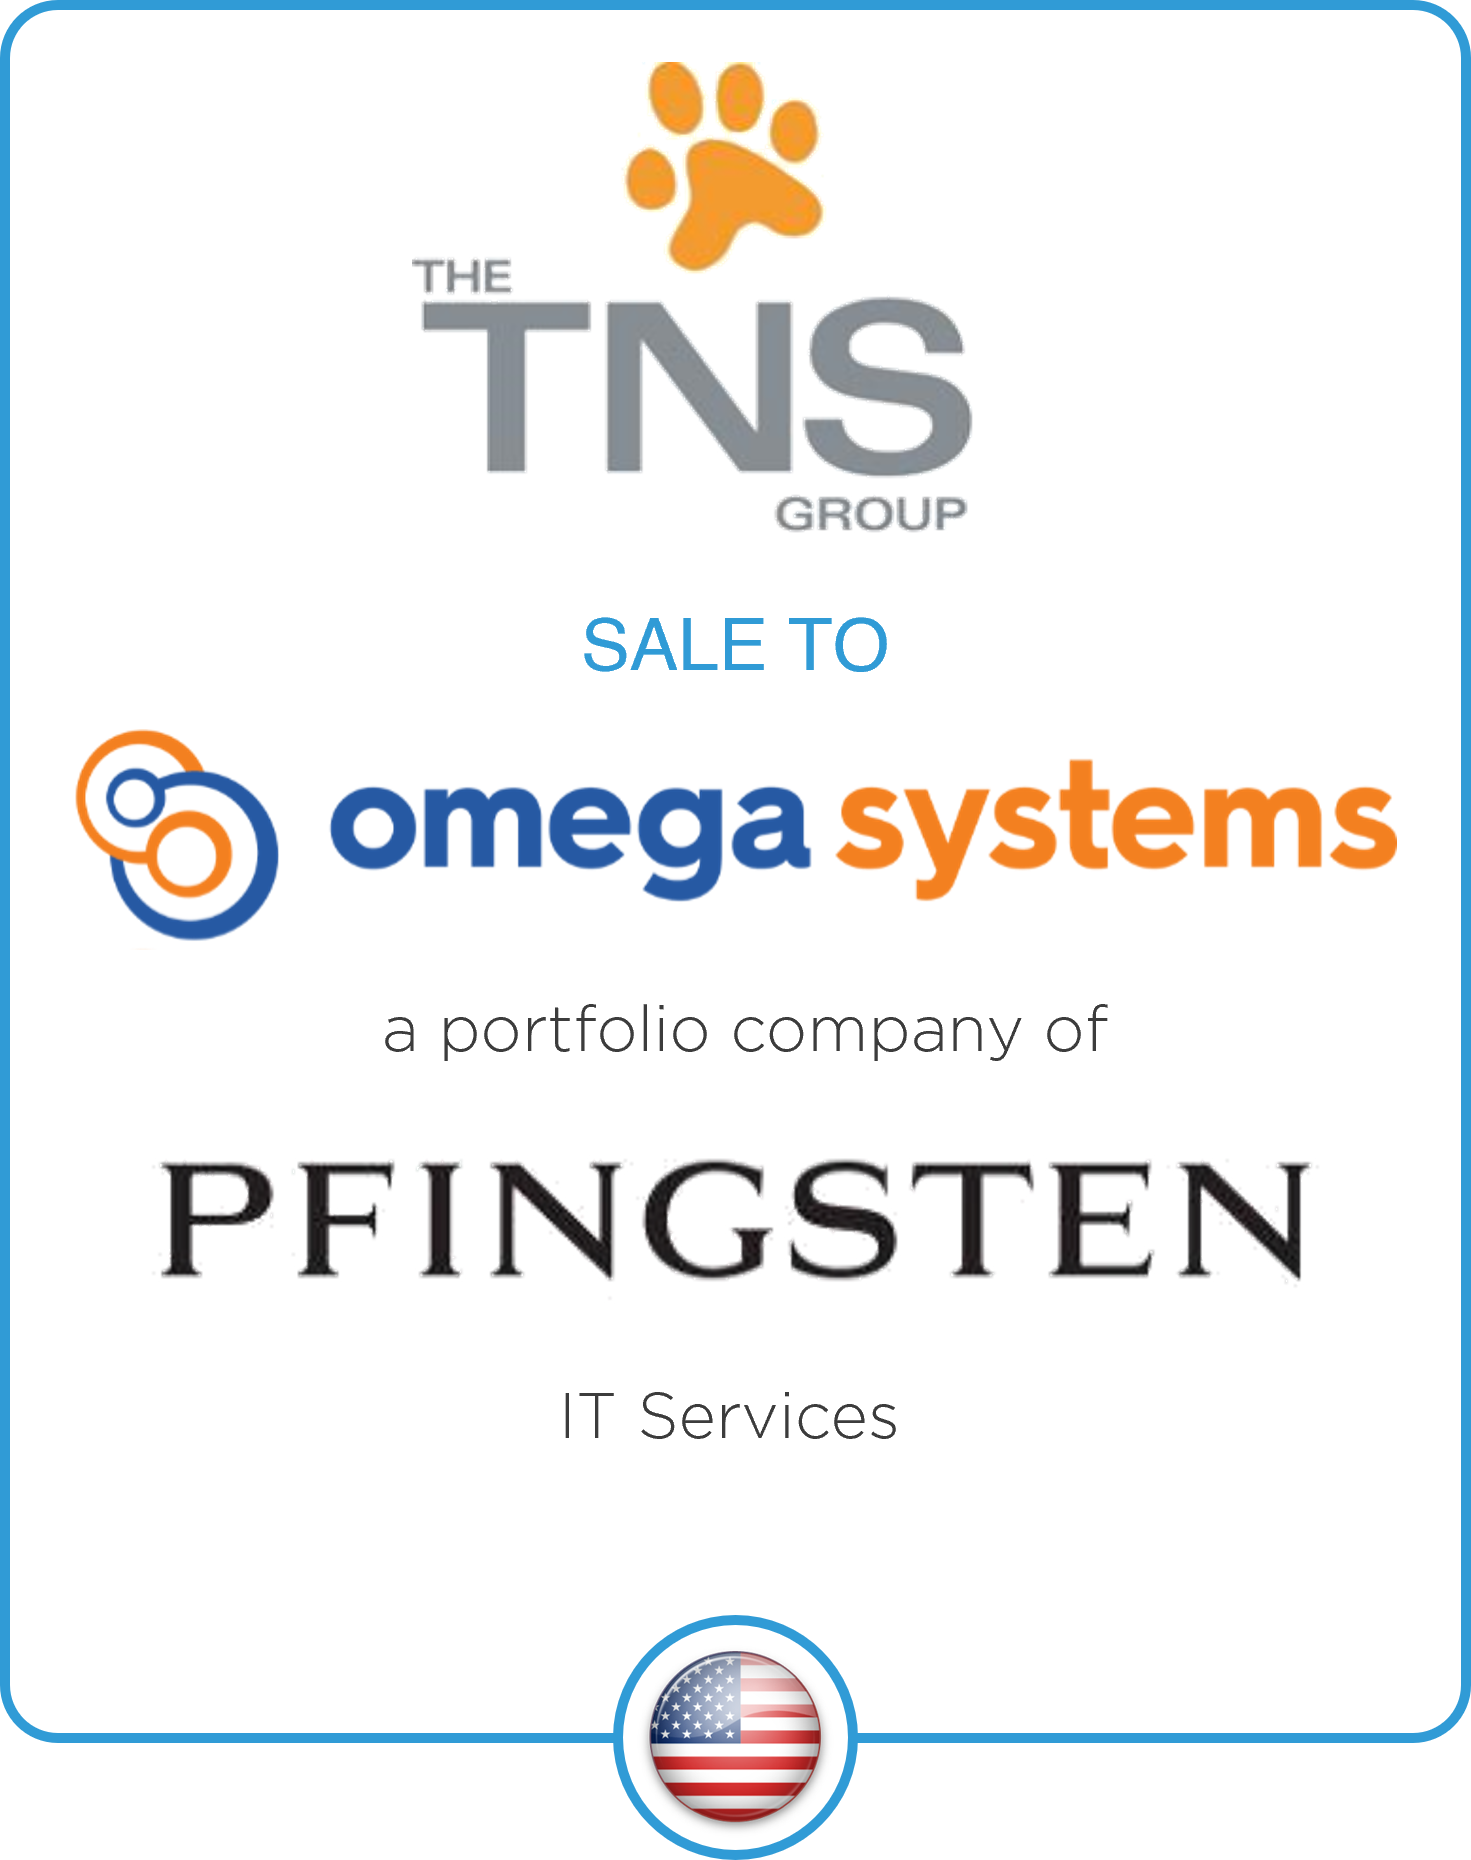 Drake Star Acts as Exclusive Financial Advisor to The TNS Group on its Sale to Omega Systems, a Pfingsten Partners portfolio company